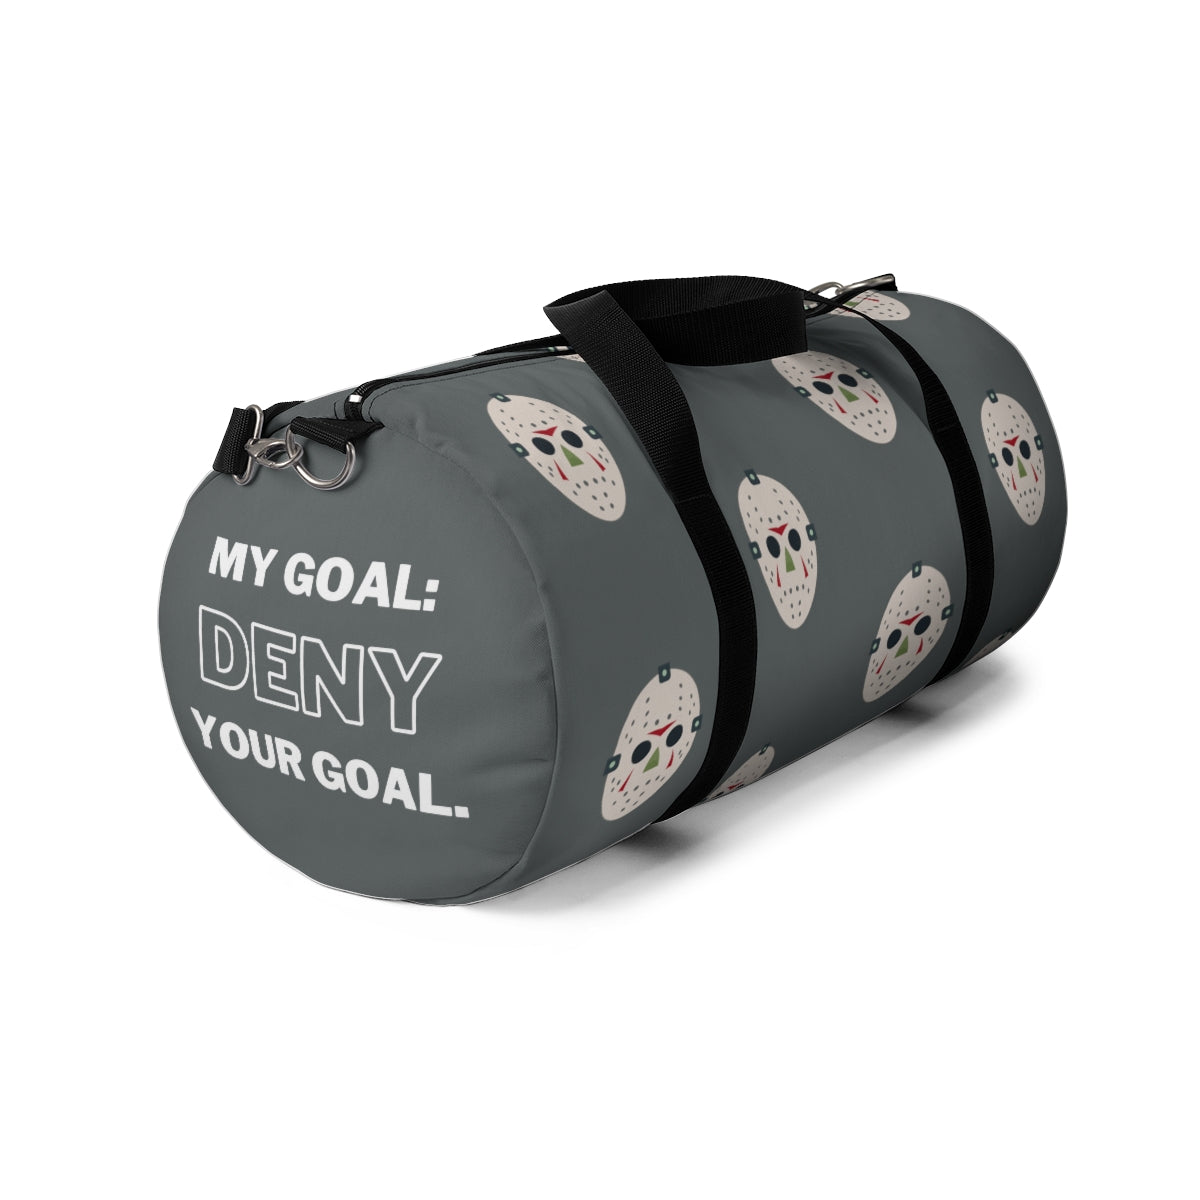 My Goalie is to Deny your Goal- Hockey Tournament Duffel Bag